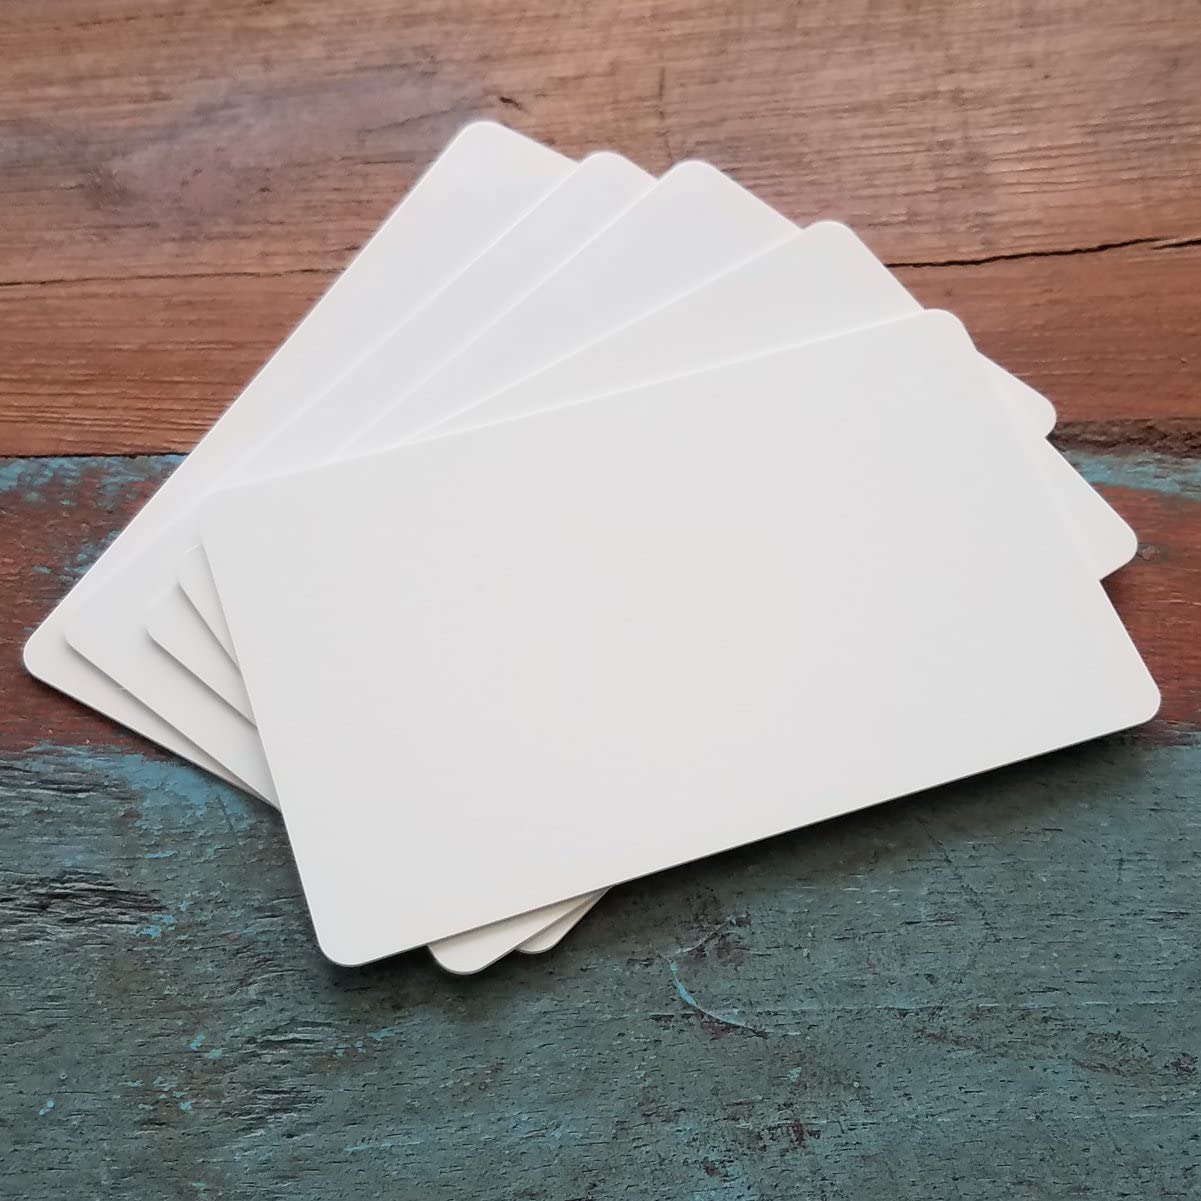 100 Pack - Premium Blank PVC Cards for ID Badge Printers, White, Plastic CR80 30 Mil (CR8030)